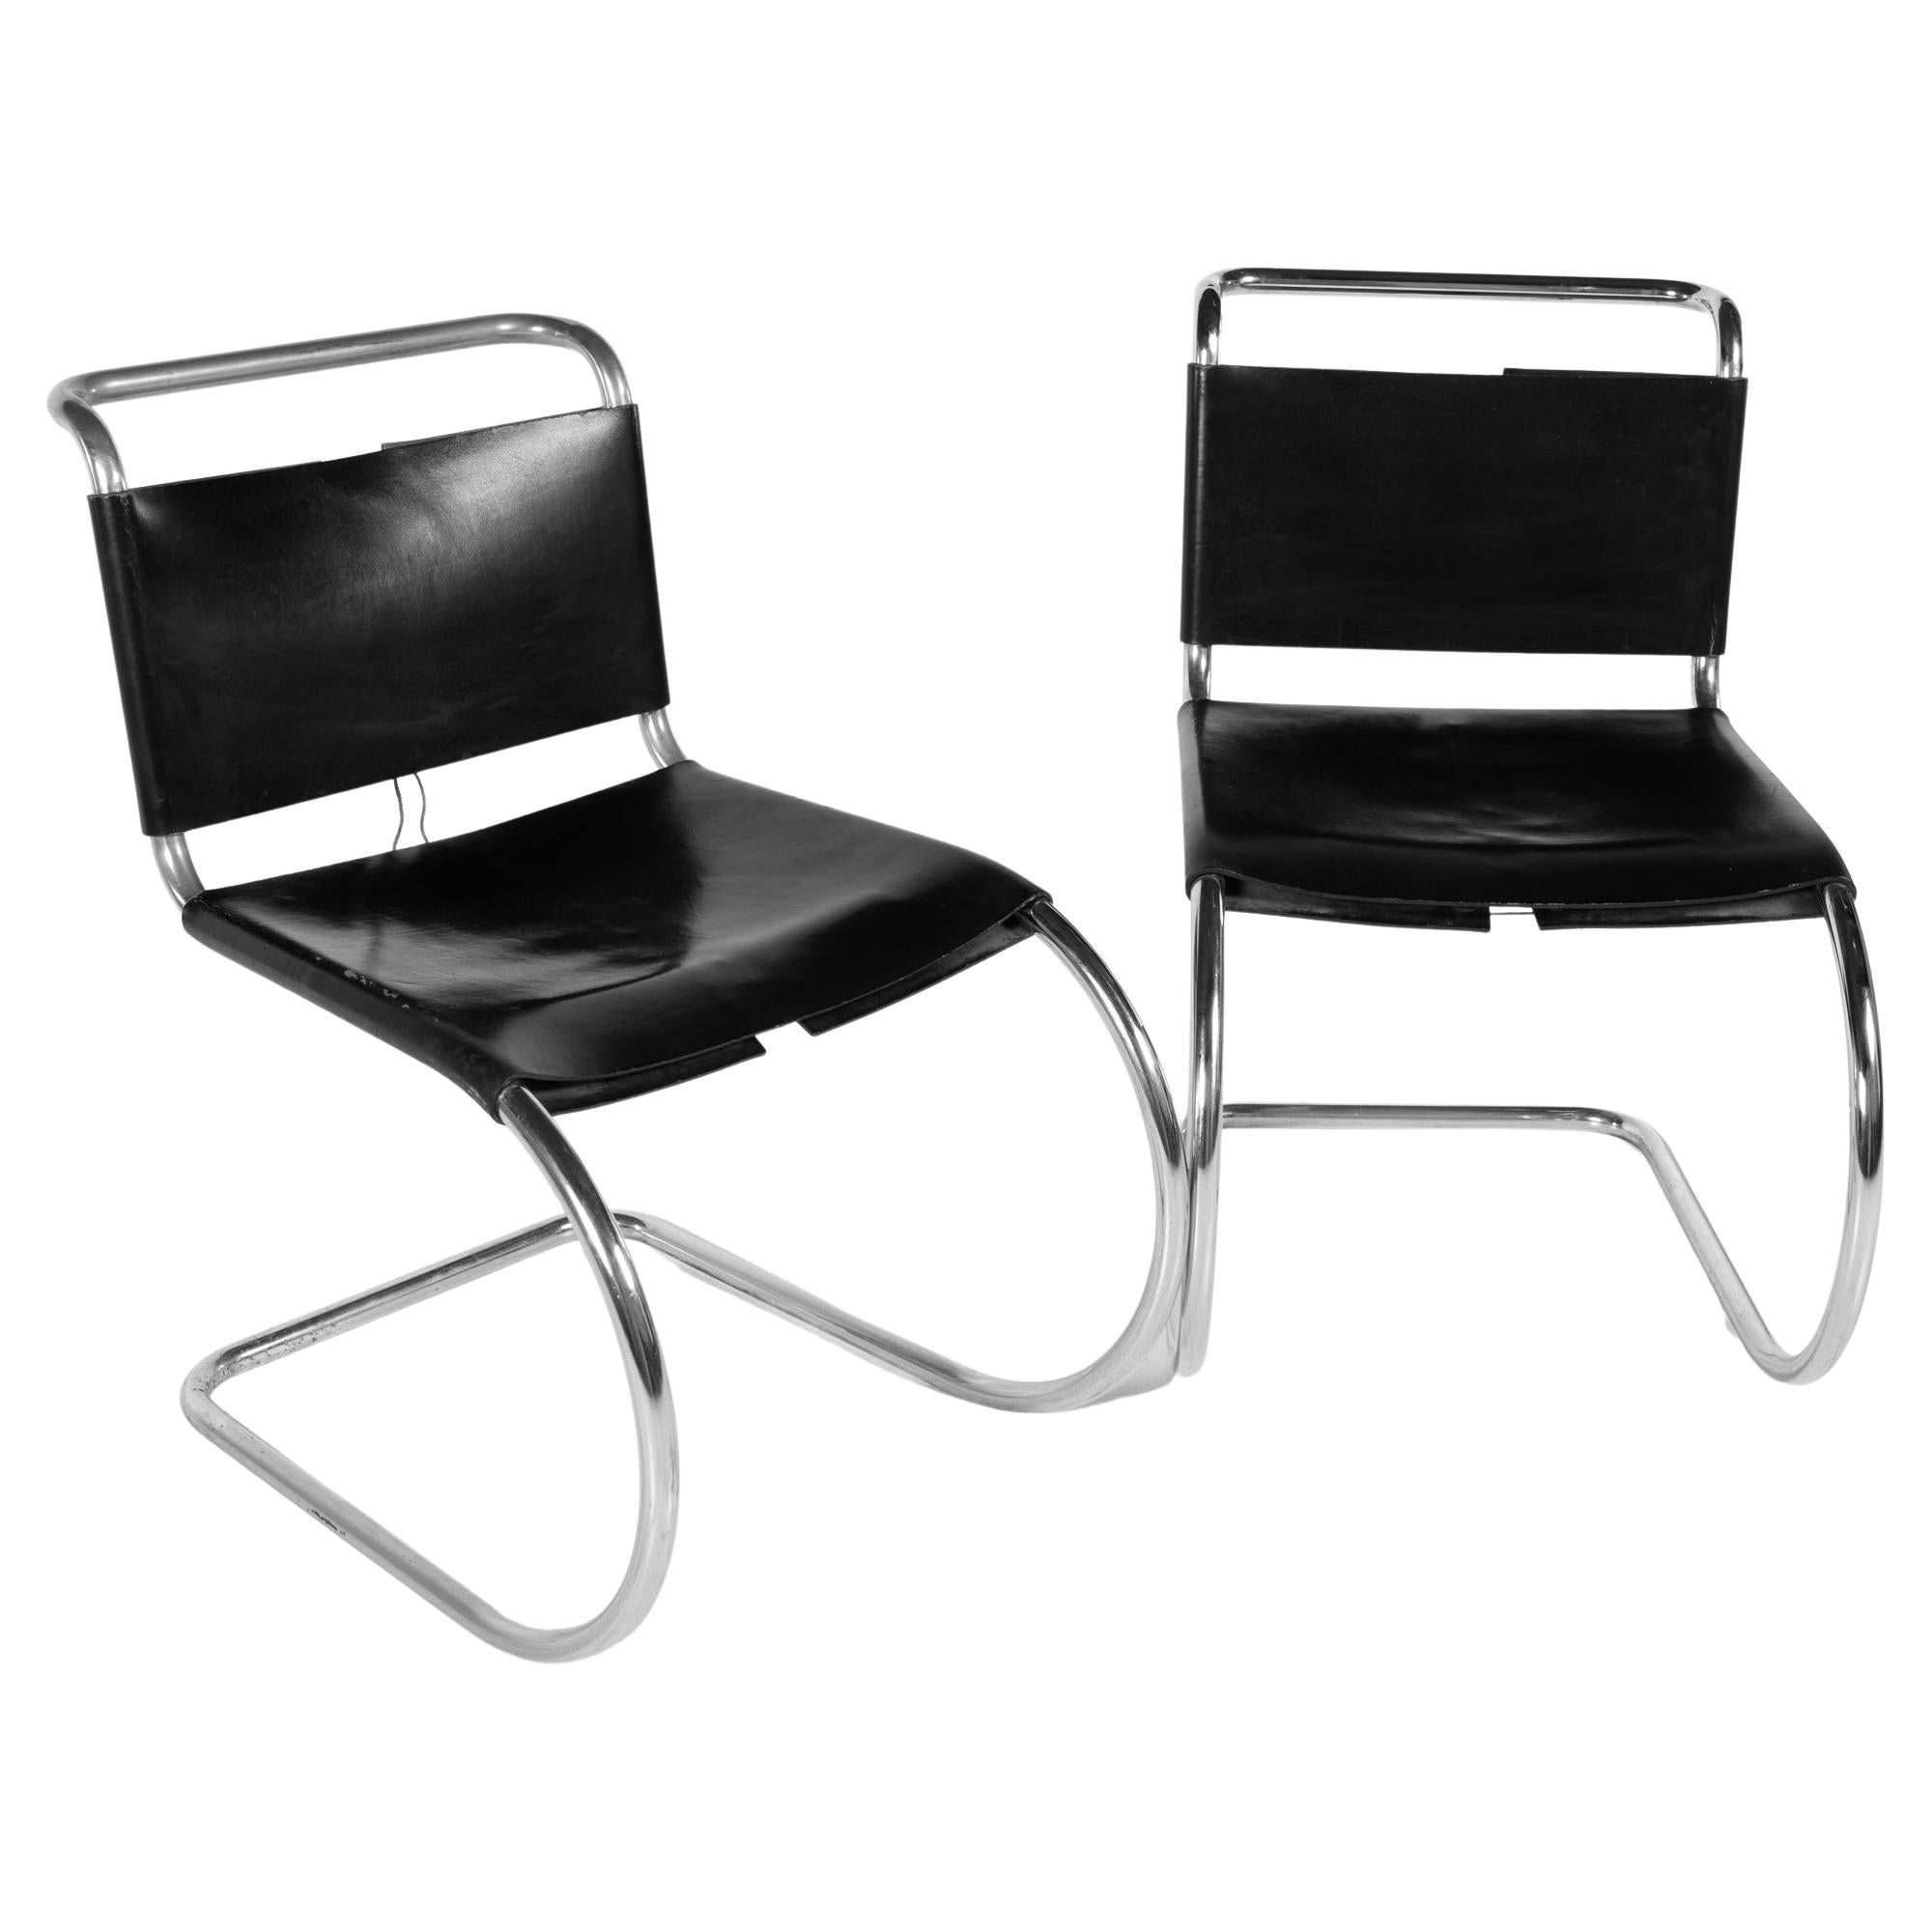 Mart Stam for Fasem Model S33 Mid Century Leather and Chrome Cantilever Chairs